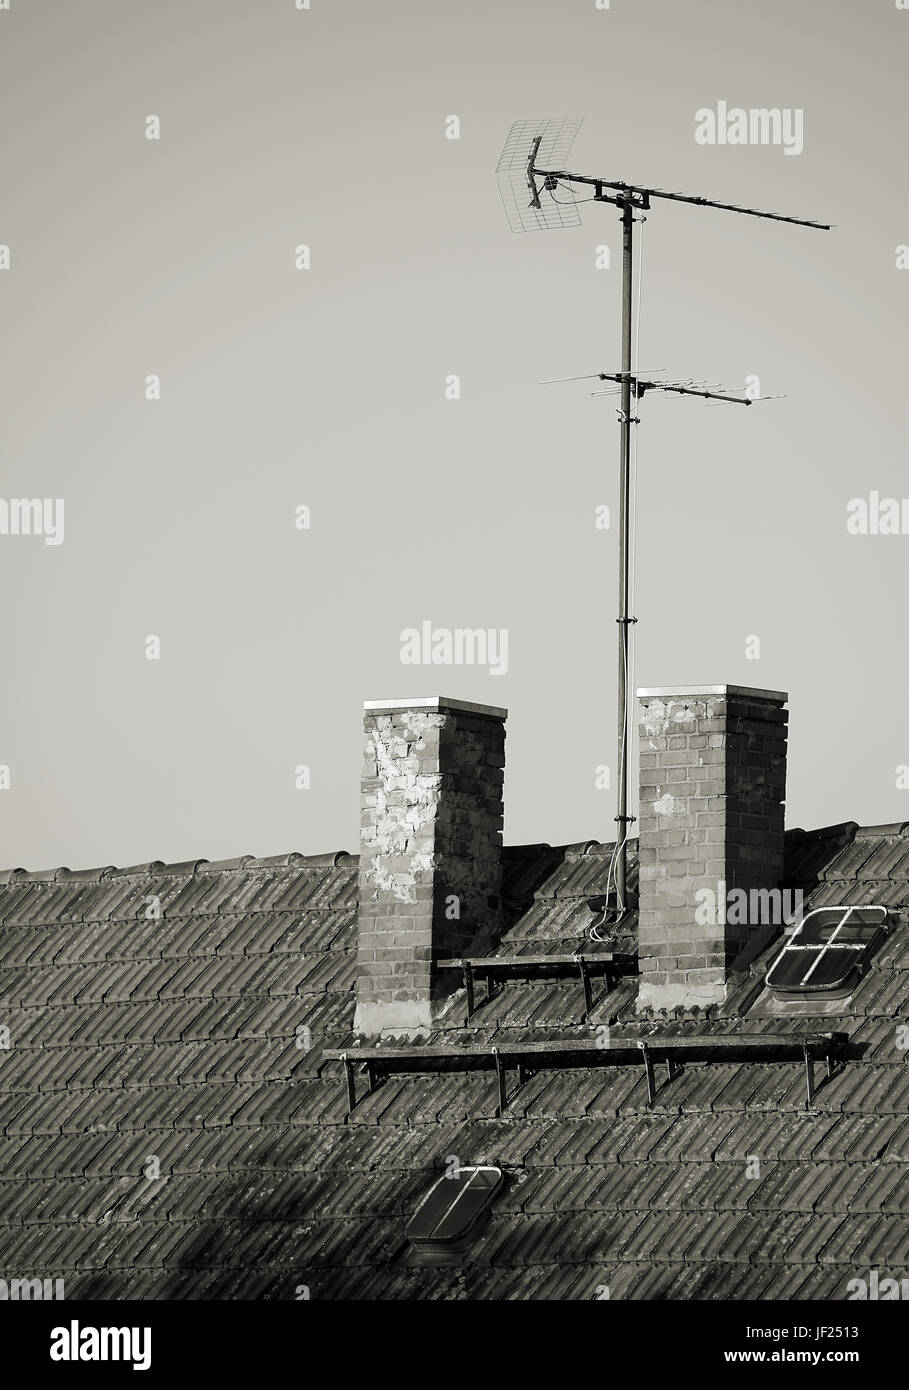 old antennas on a roof Stock Photo